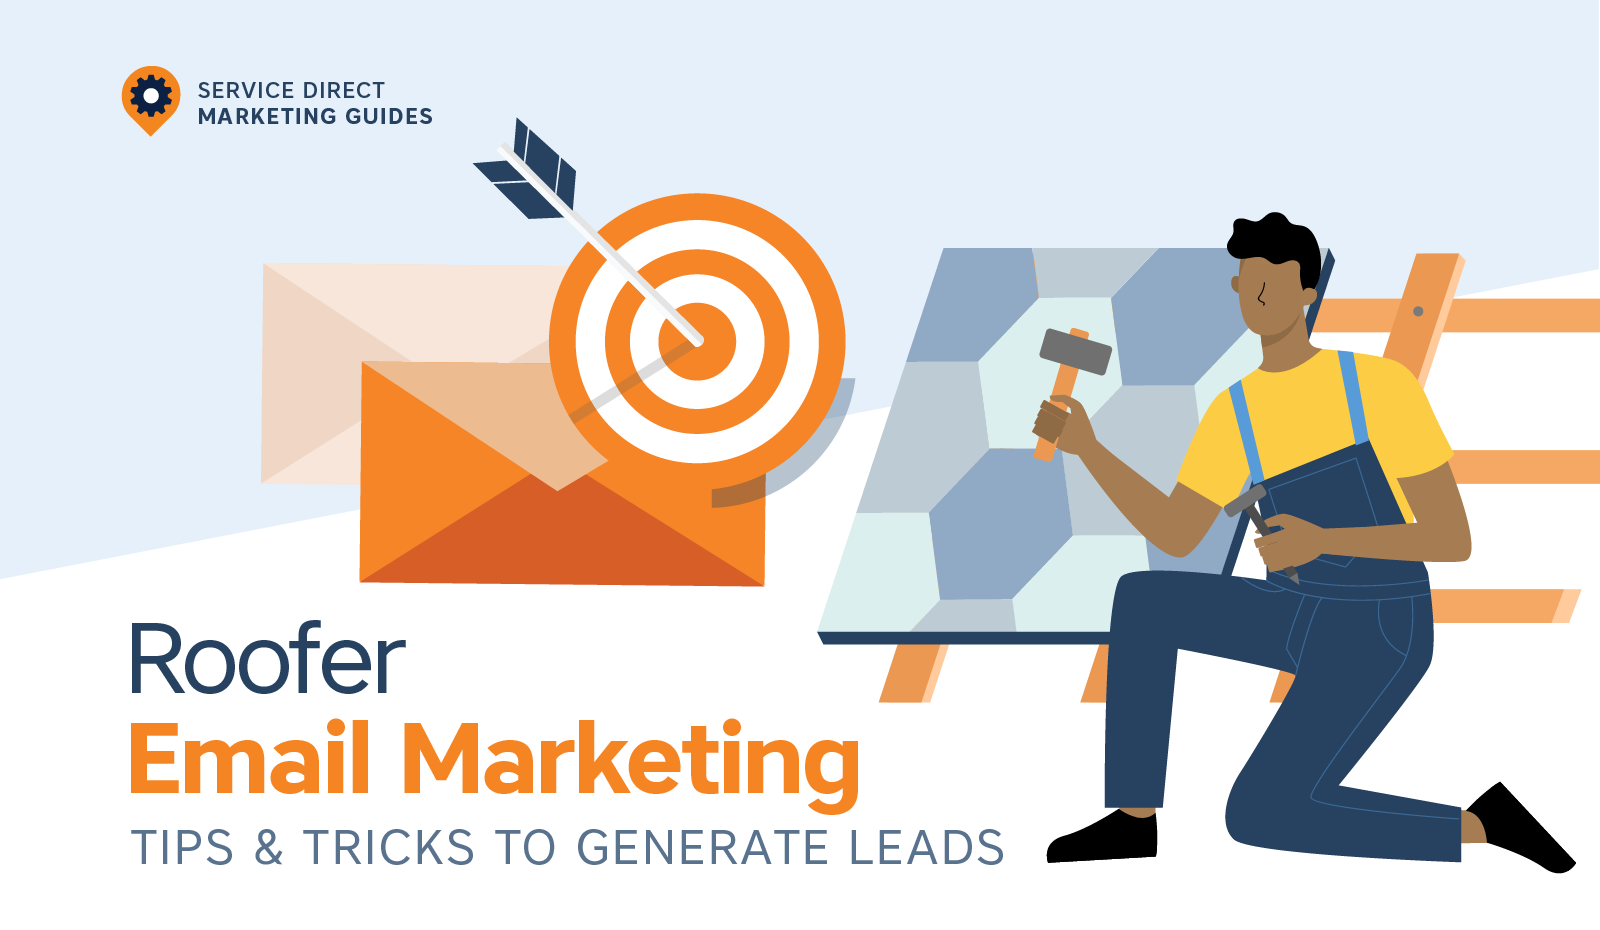 Roofer Email Marketing Tips & Tricks to Generate Leads